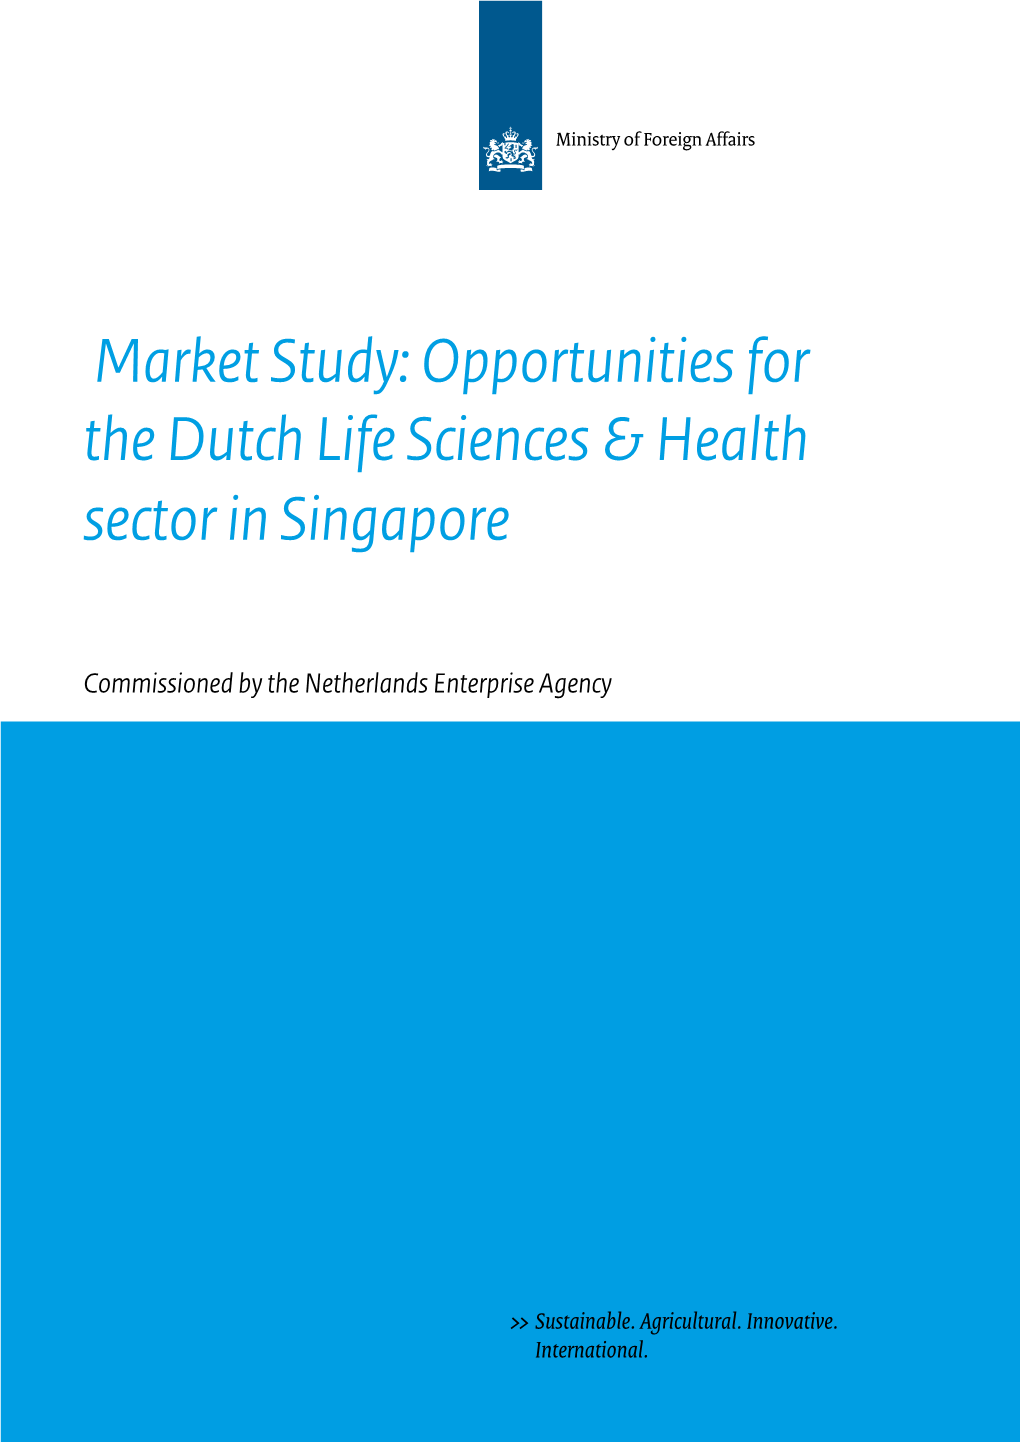 Market Study Opportunities for the Dutch Life Sciences & Health Sector